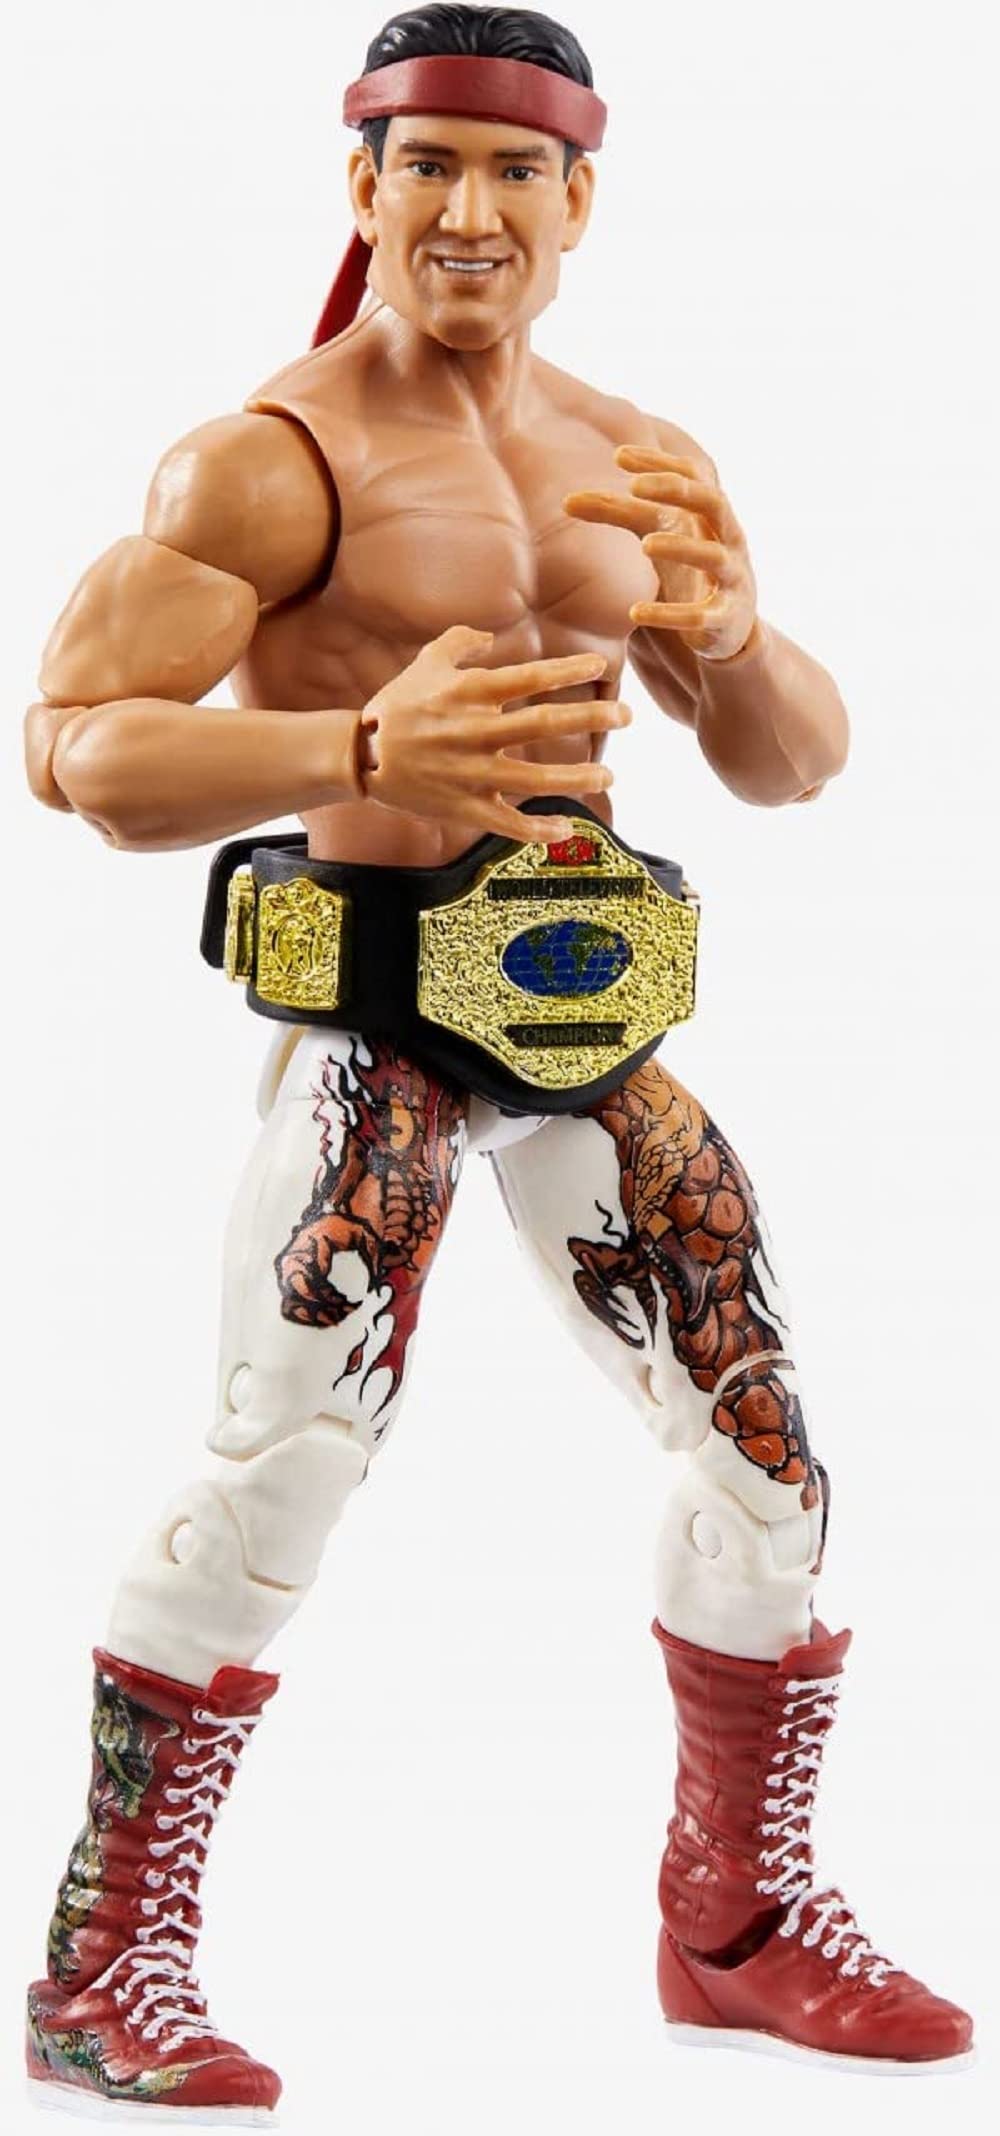 Mattel Ricky The Dragon Steamboat Elite Collection Action Figure